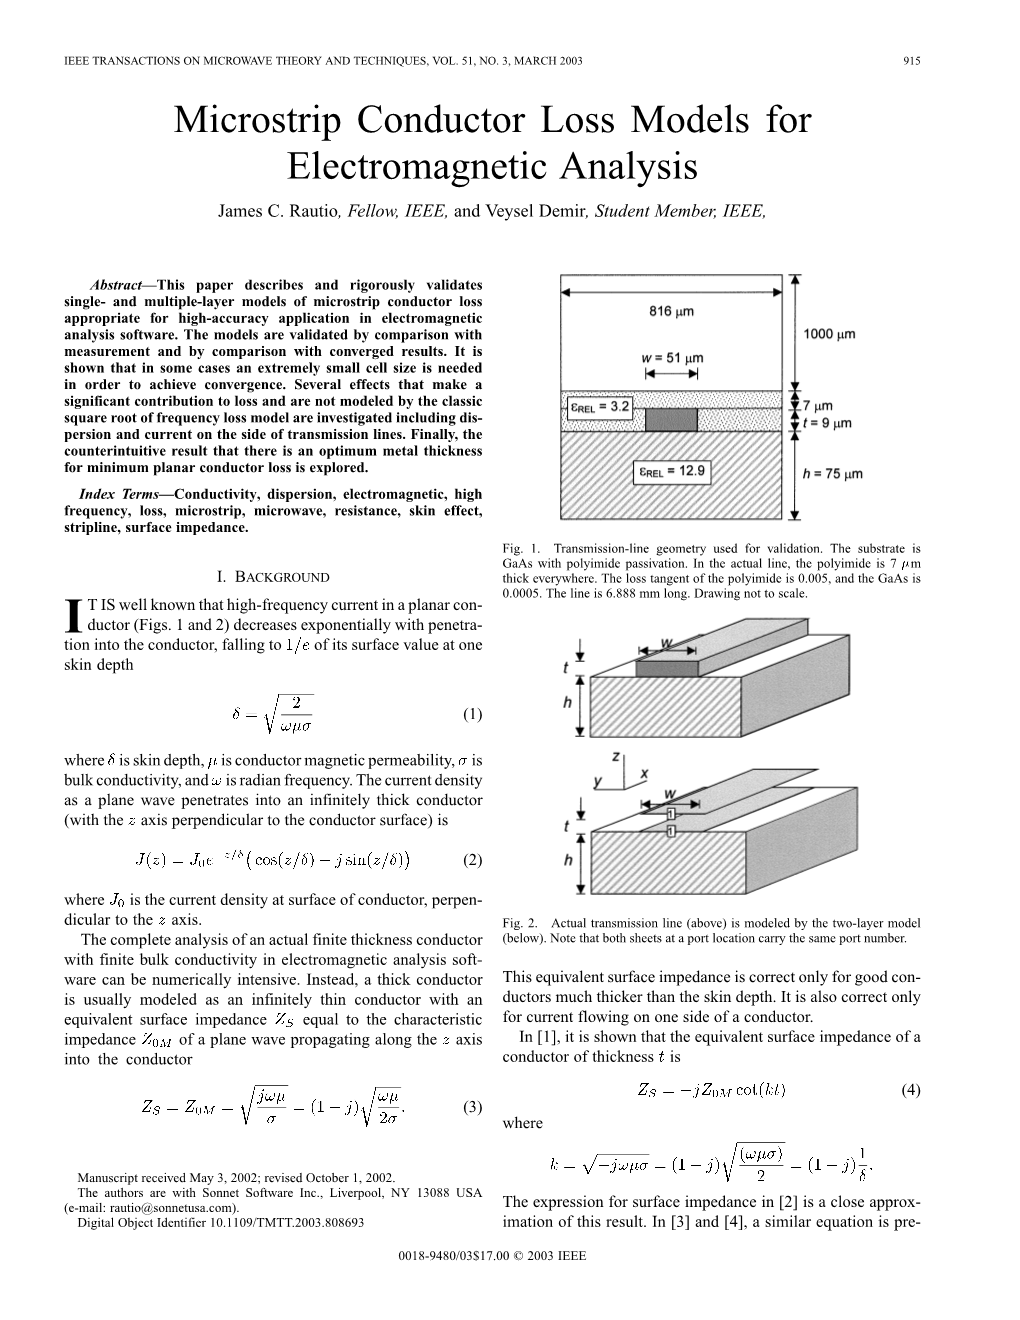 Microstrip Conductor Loss Models for Electromagnetic Analysis James C